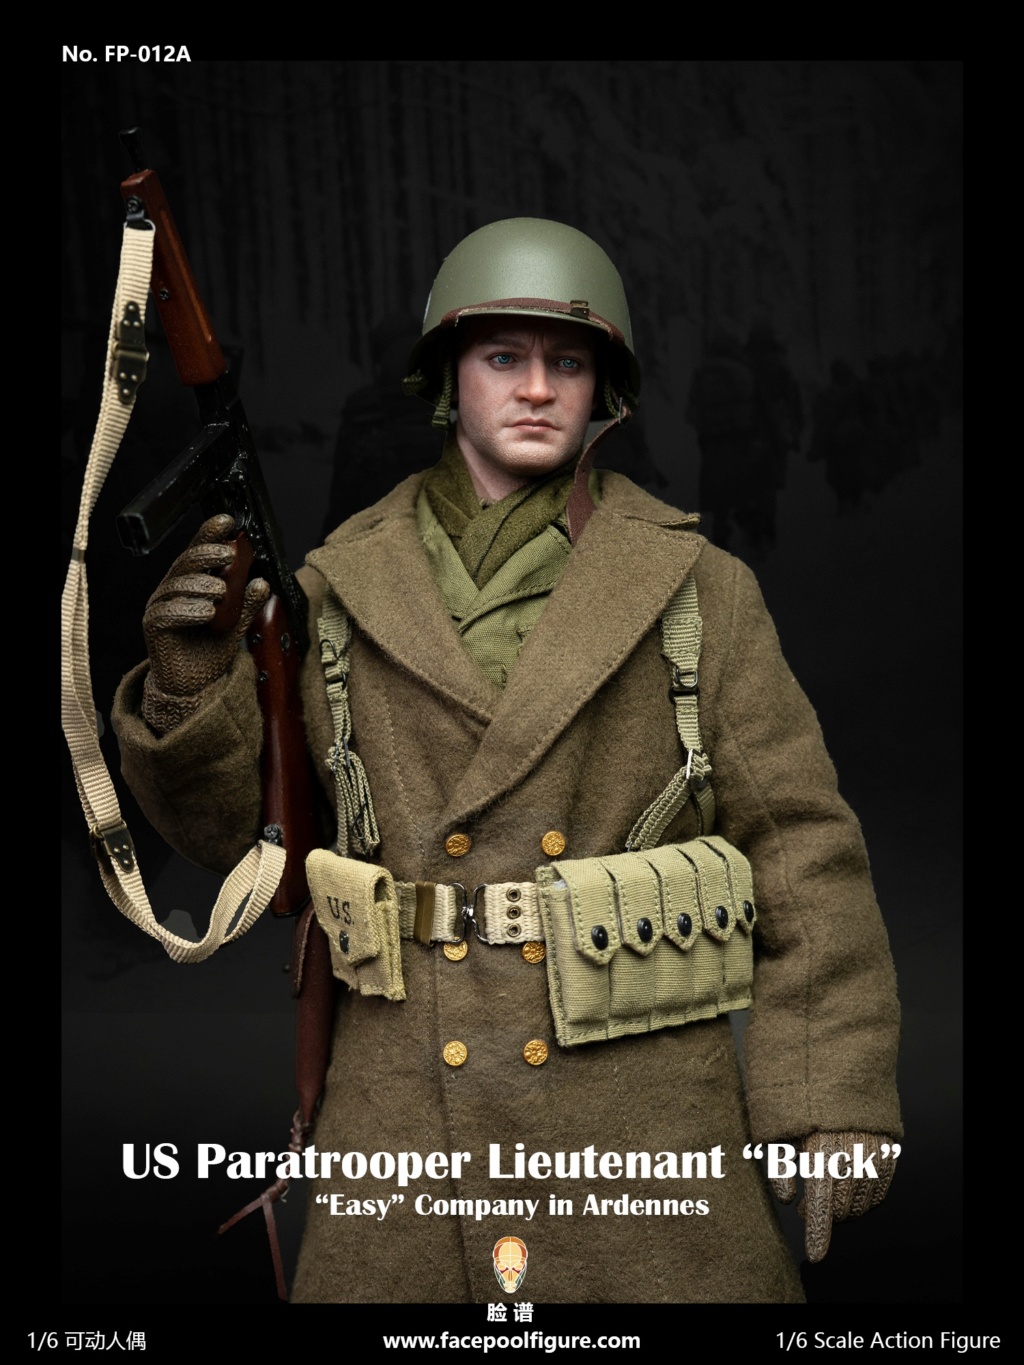 Historical - NEW PRODUCT: Facepool: 1/6 Scale US Paratrooper Lieutenant “Buck” (FP012A & B) (2 versions) 10140010